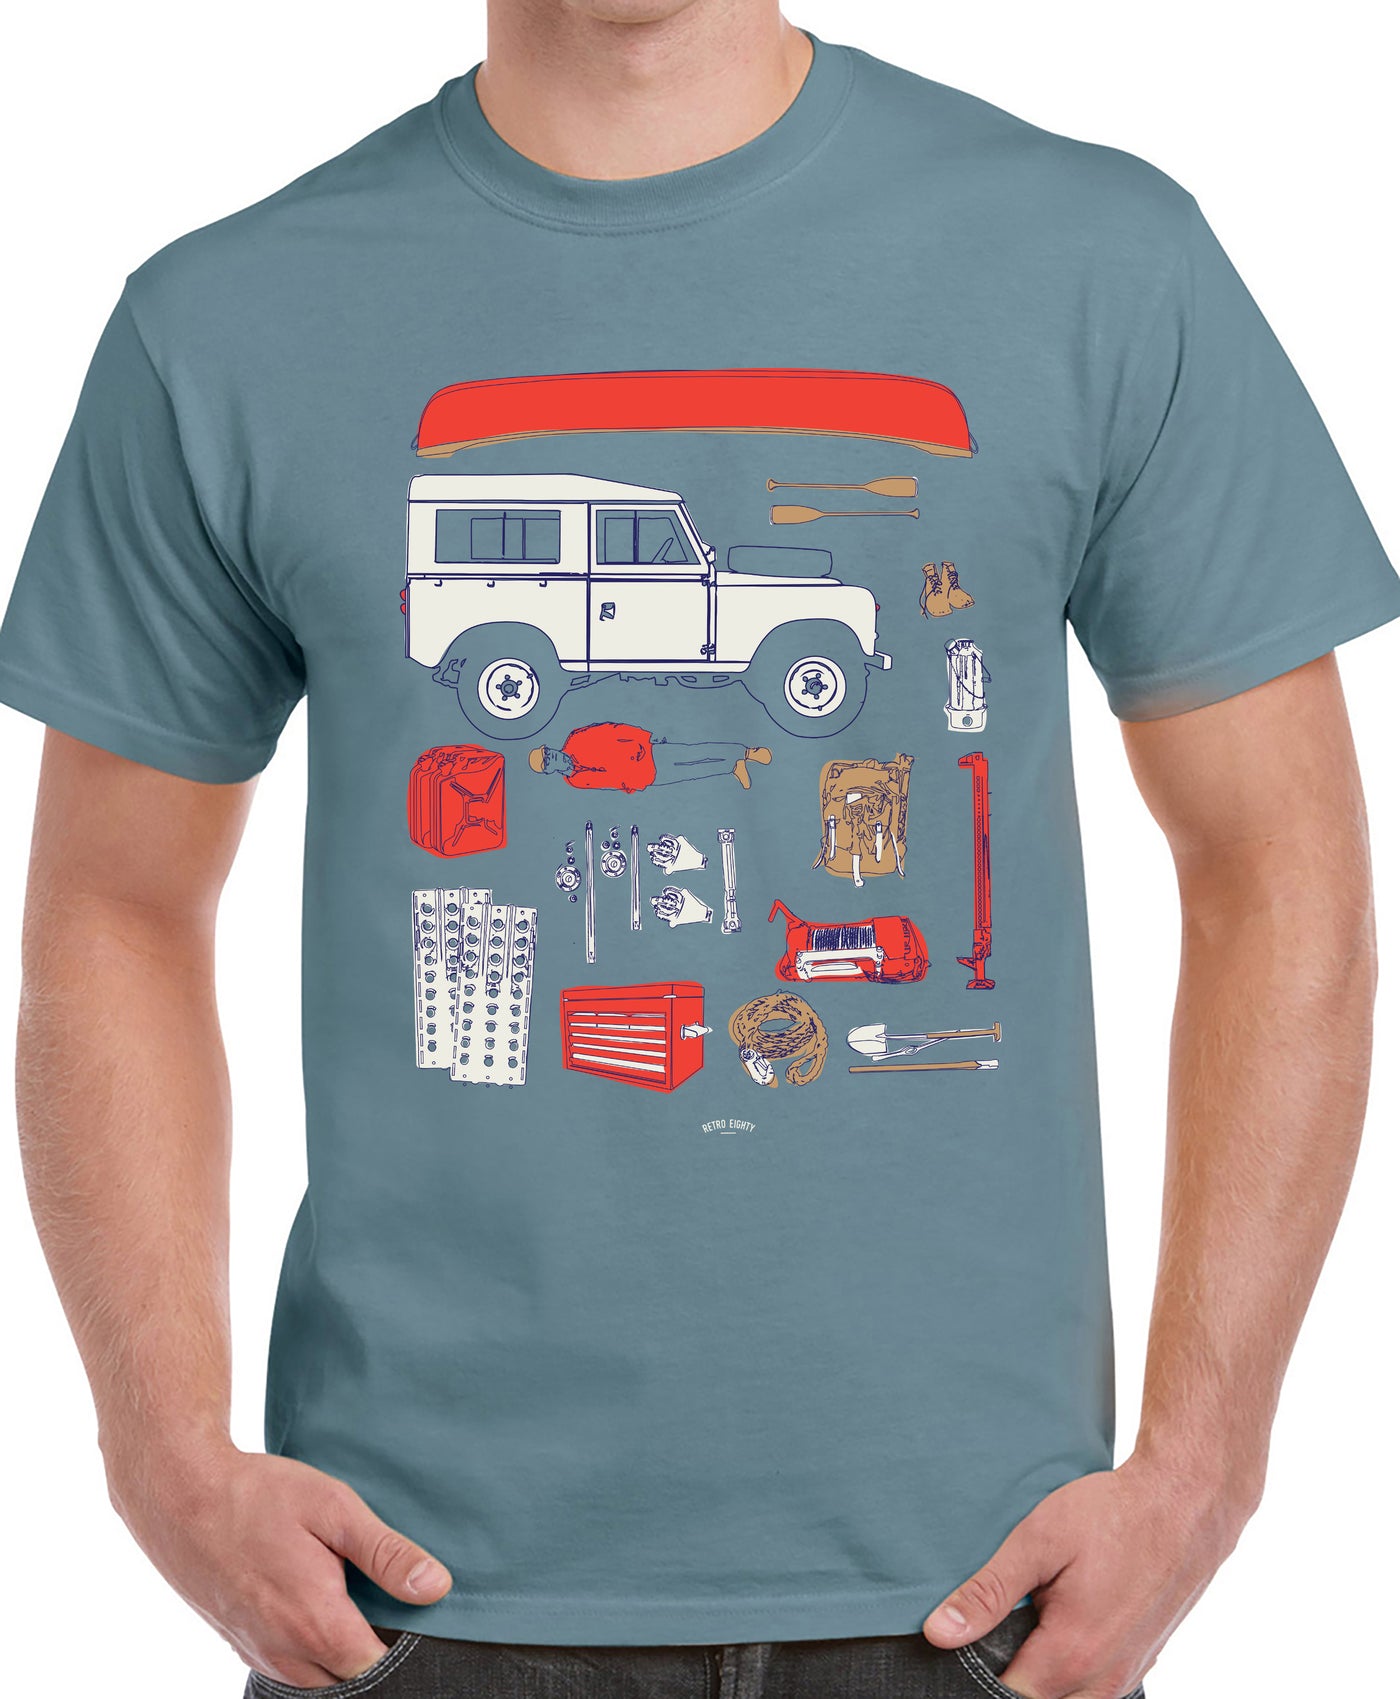 Overland Division Series Land Rover t-shirt